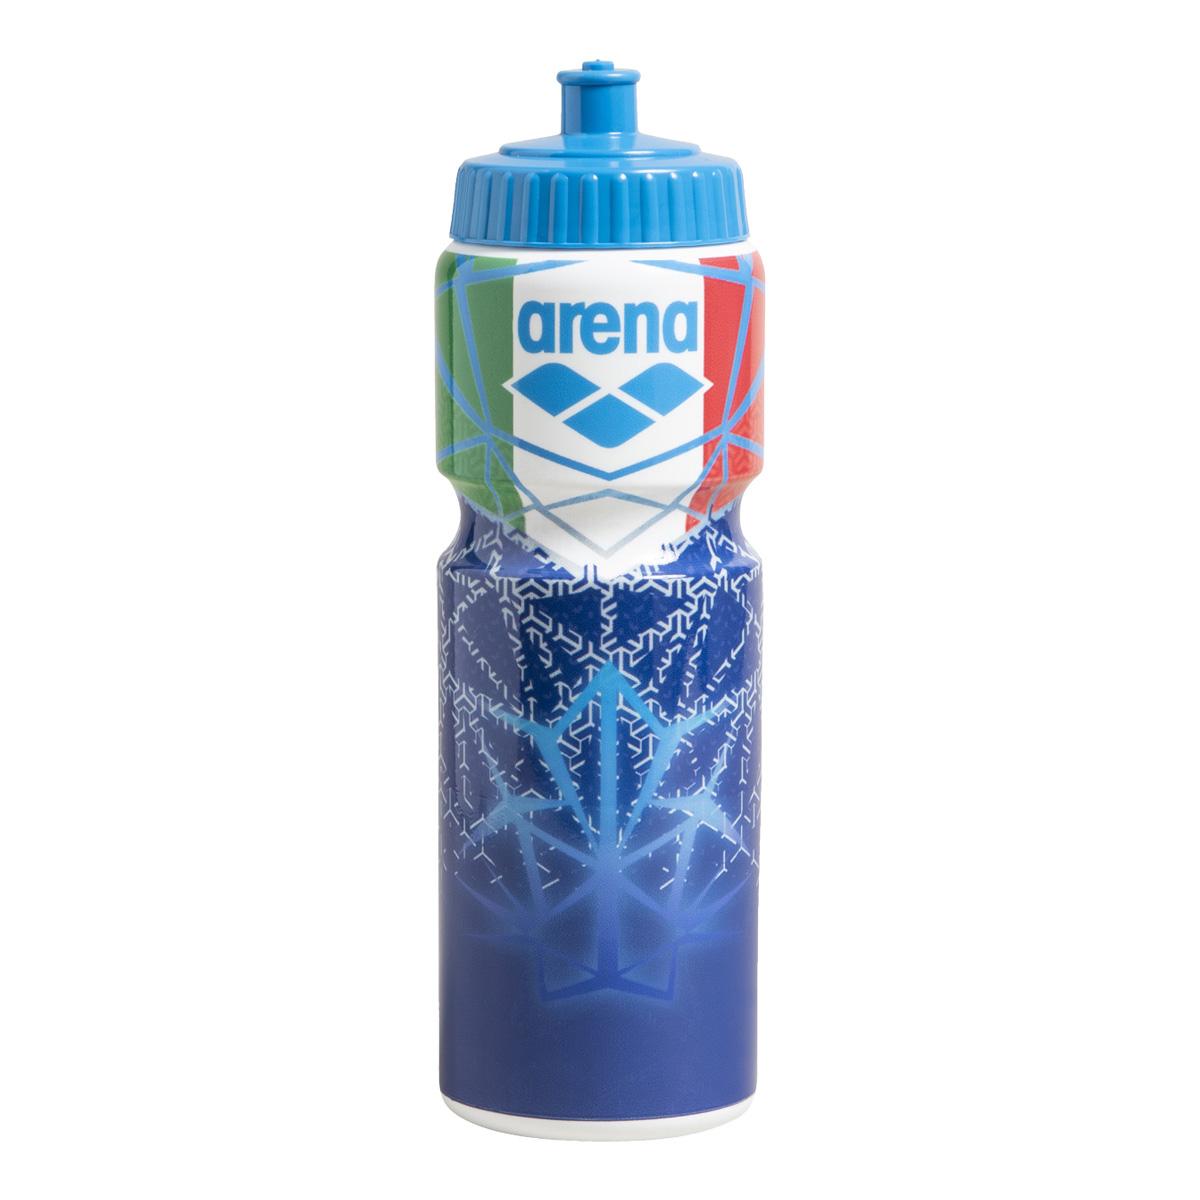 Arena Water Bottle - Italy